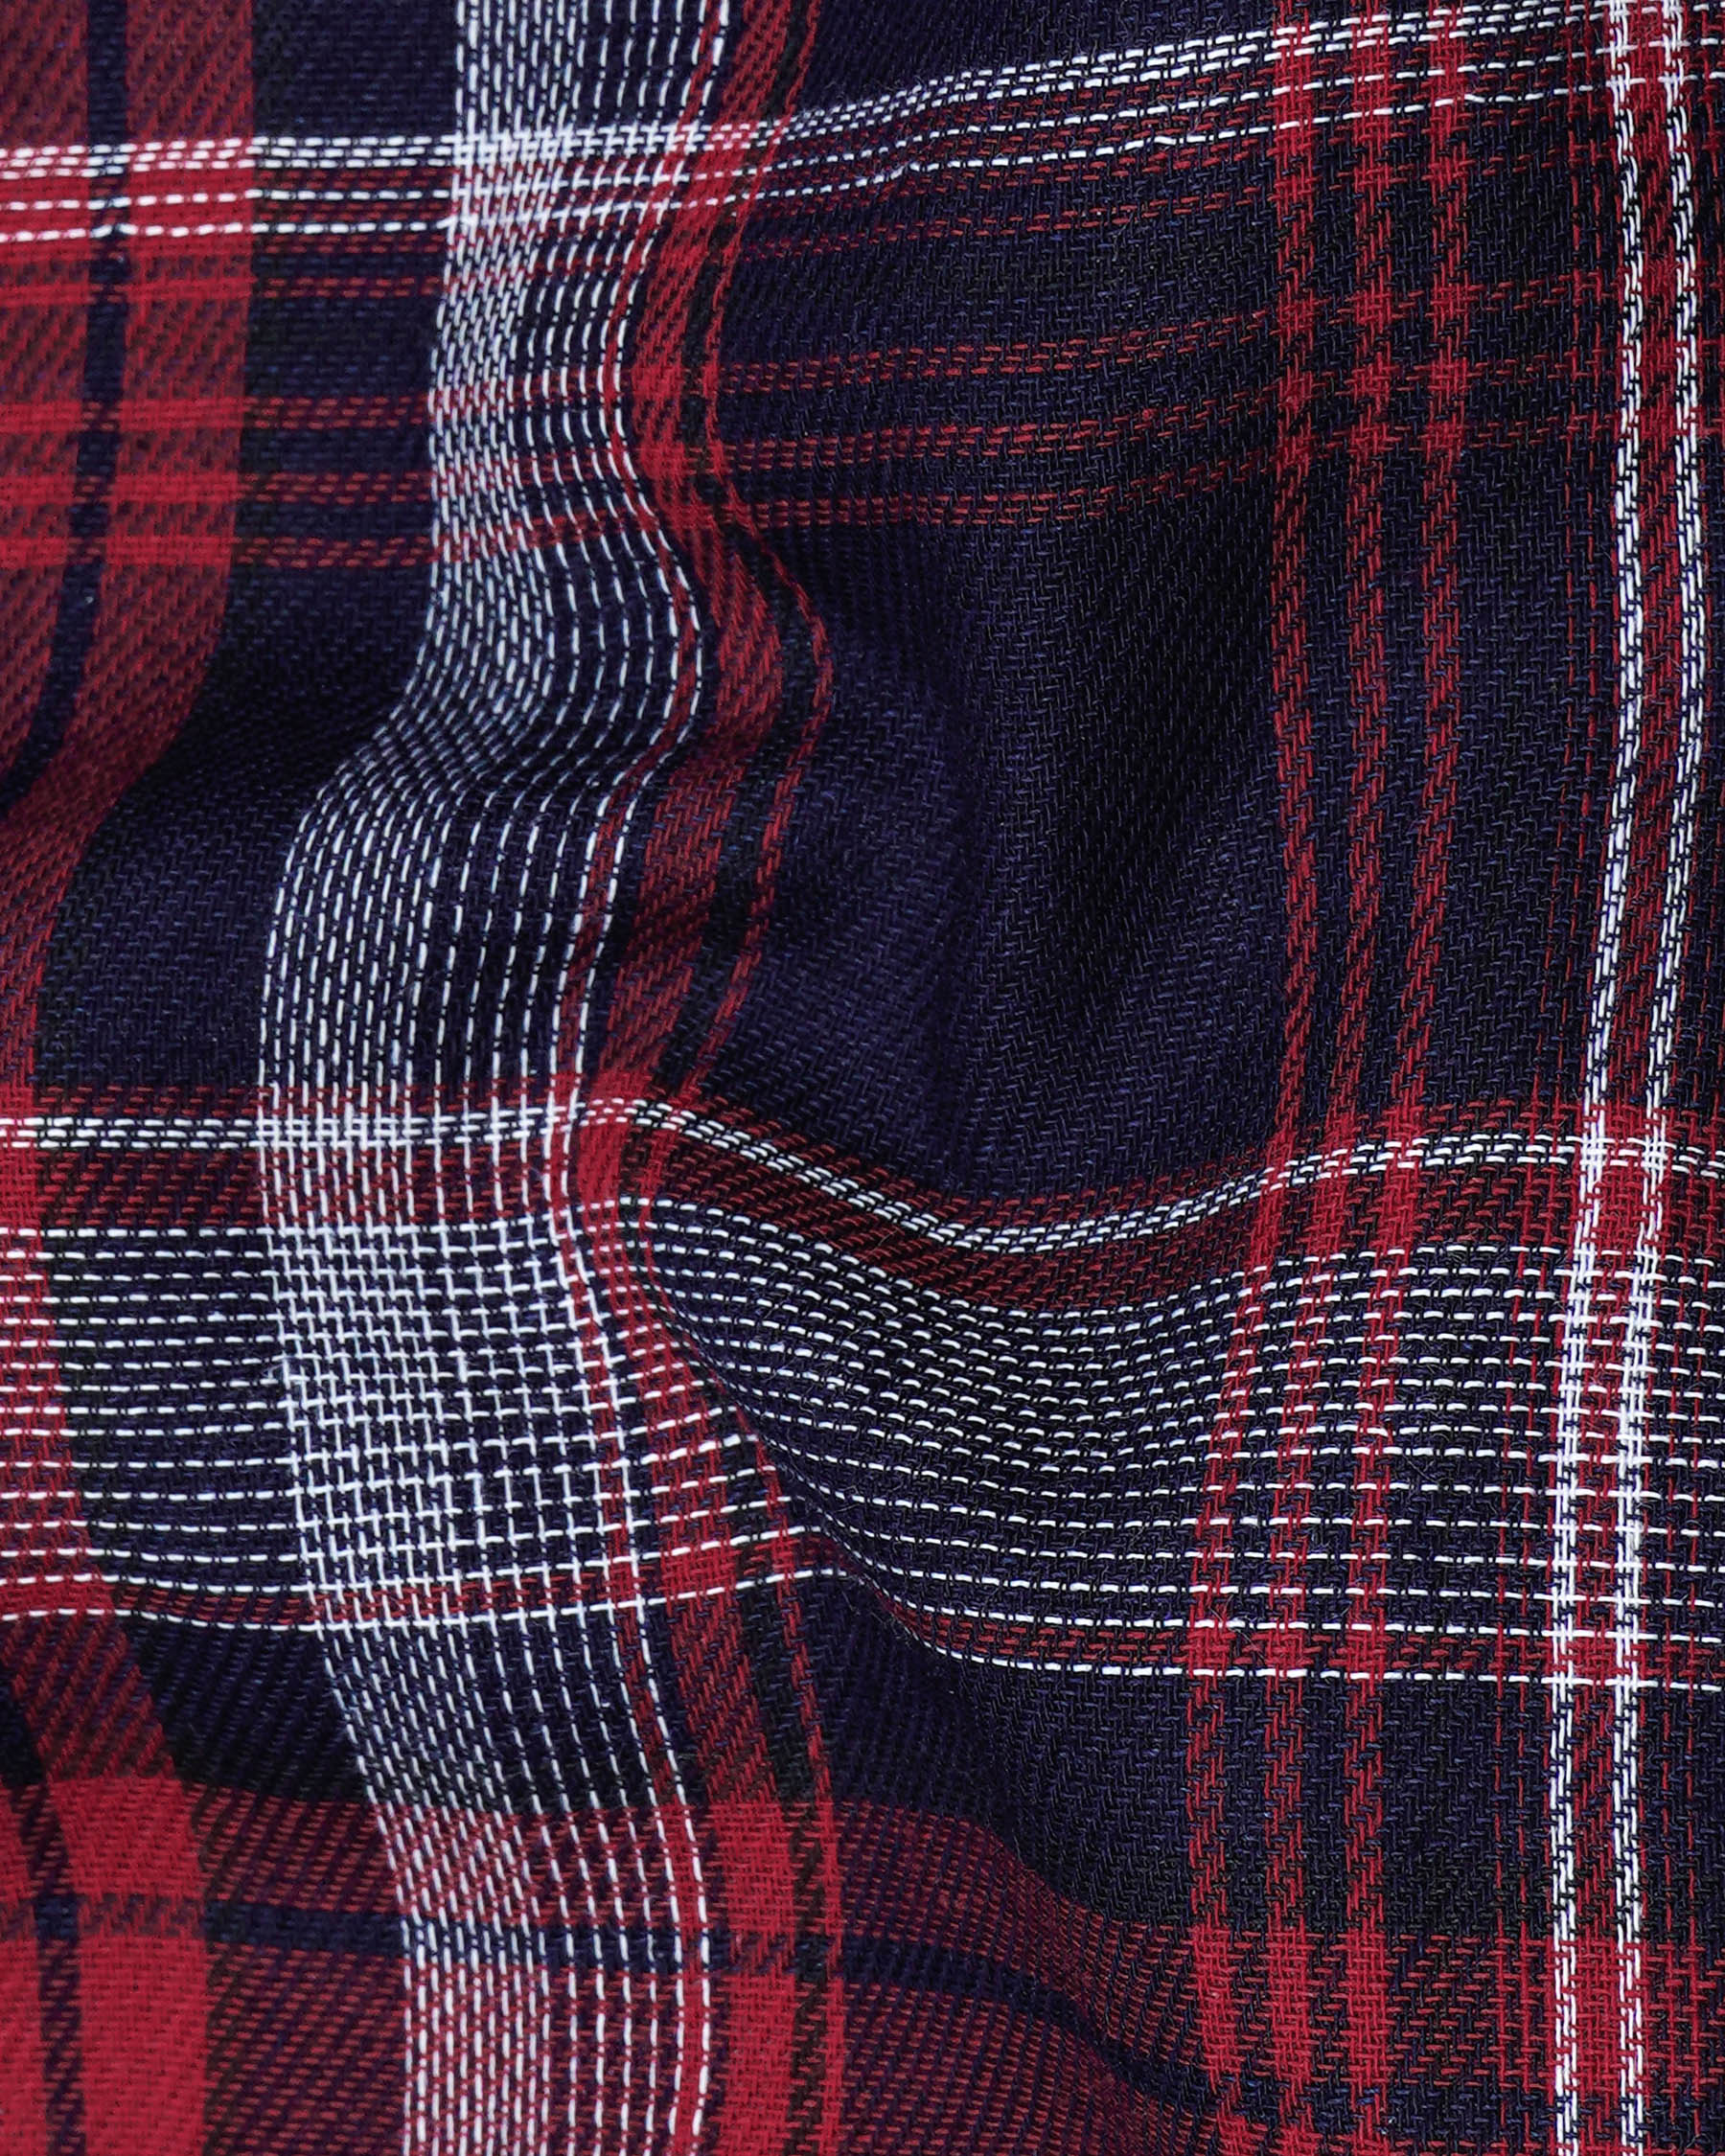 Cinder Navy Blue and Stiletto Red Twill Plaid Premium Cotton Shirt 8040-BD-BLE-38,8040-BD-BLE-38,8040-BD-BLE-39,8040-BD-BLE-39,8040-BD-BLE-40,8040-BD-BLE-40,8040-BD-BLE-42,8040-BD-BLE-42,8040-BD-BLE-44,8040-BD-BLE-44,8040-BD-BLE-46,8040-BD-BLE-46,8040-BD-BLE-48,8040-BD-BLE-48,8040-BD-BLE-50,8040-BD-BLE-50,8040-BD-BLE-52,8040-BD-BLE-52